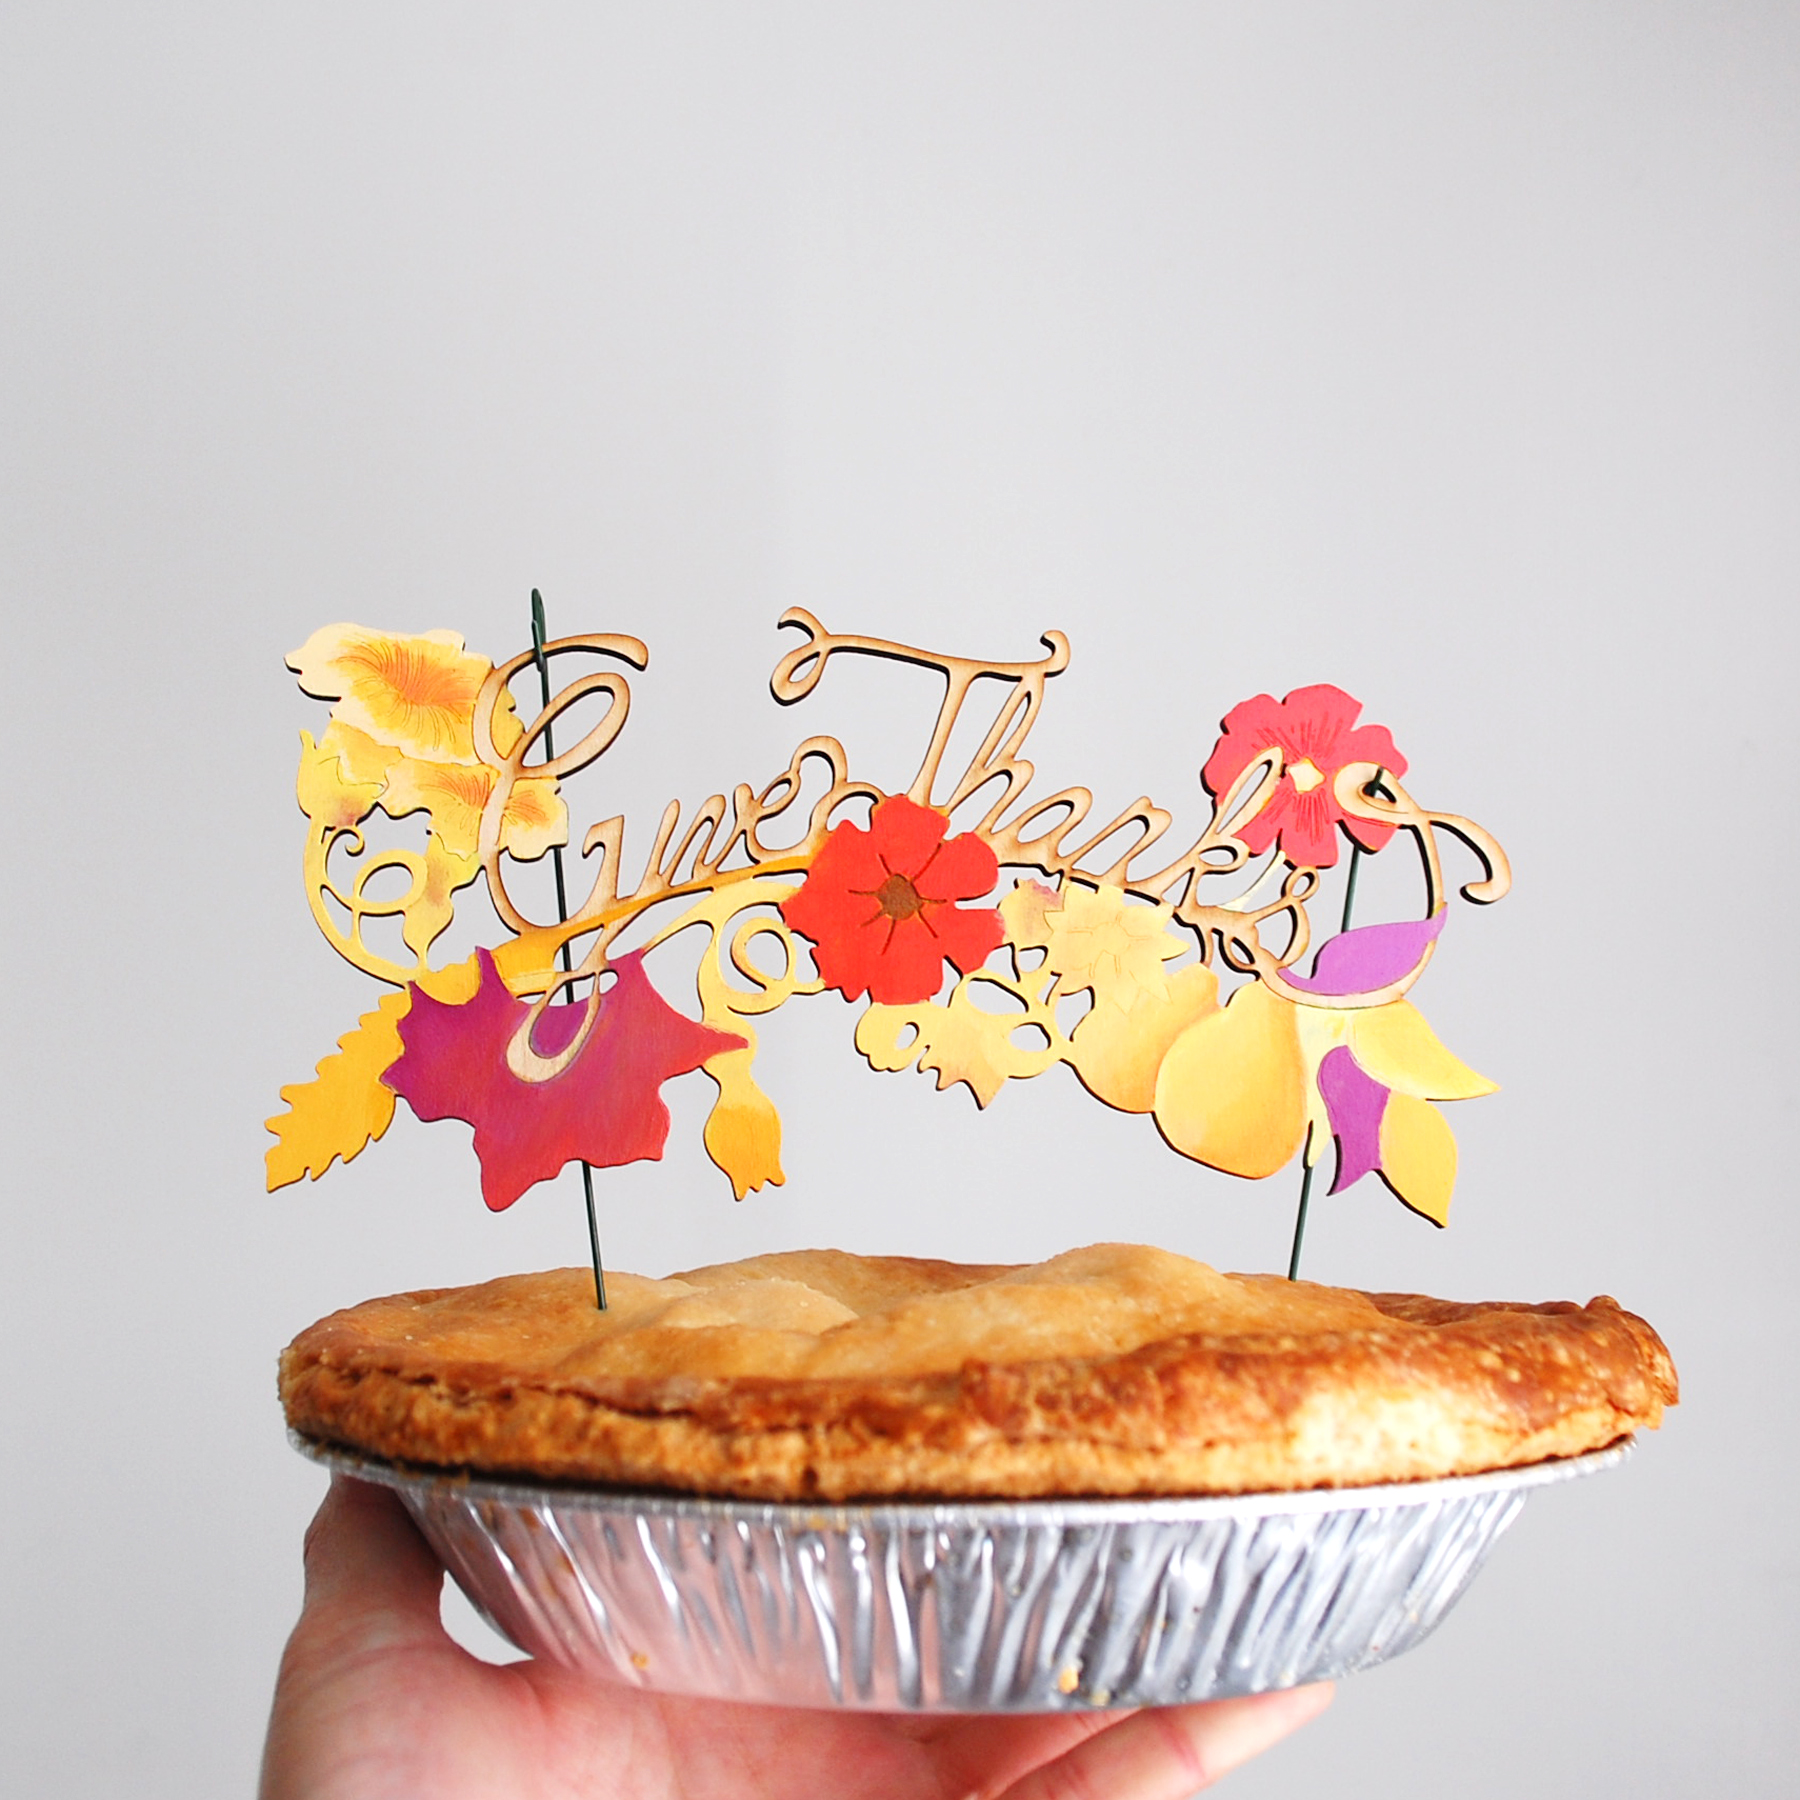 Give-Thanks-Pie-Topper-01.jpg